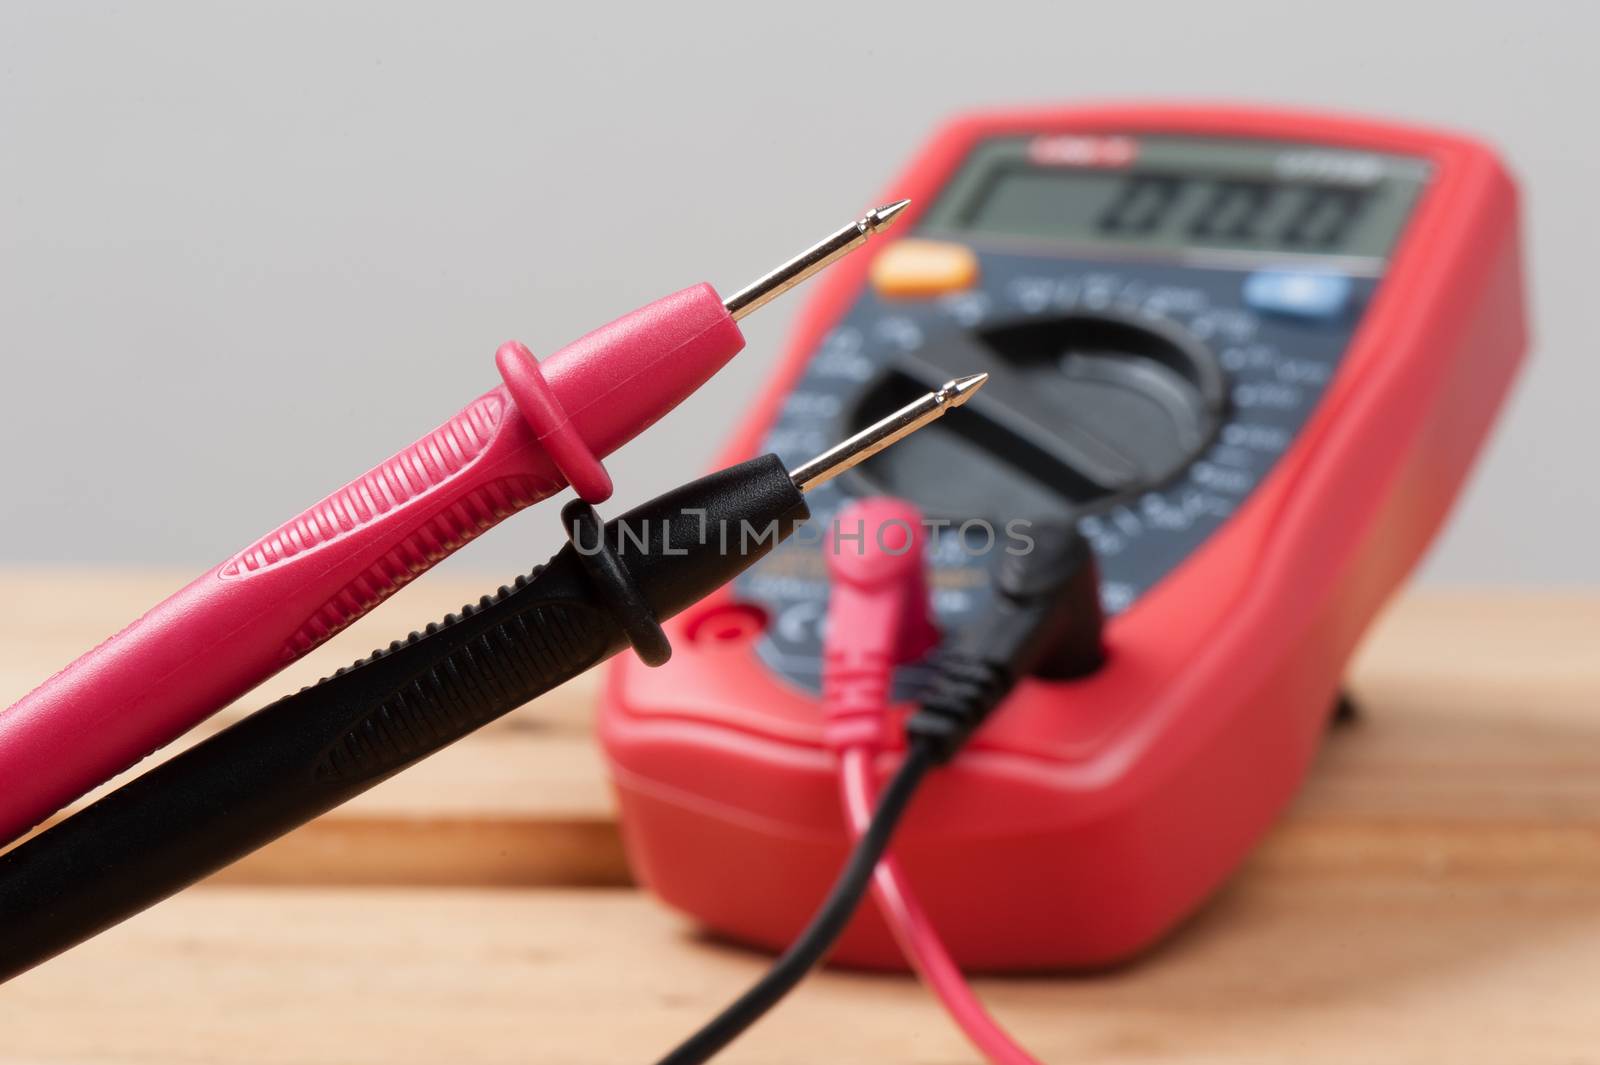 digital multimeter or multitester or Volt-Ohm meter (closeup at test leads), an electronic measuring instrument that combines several measurement functions in one unit.